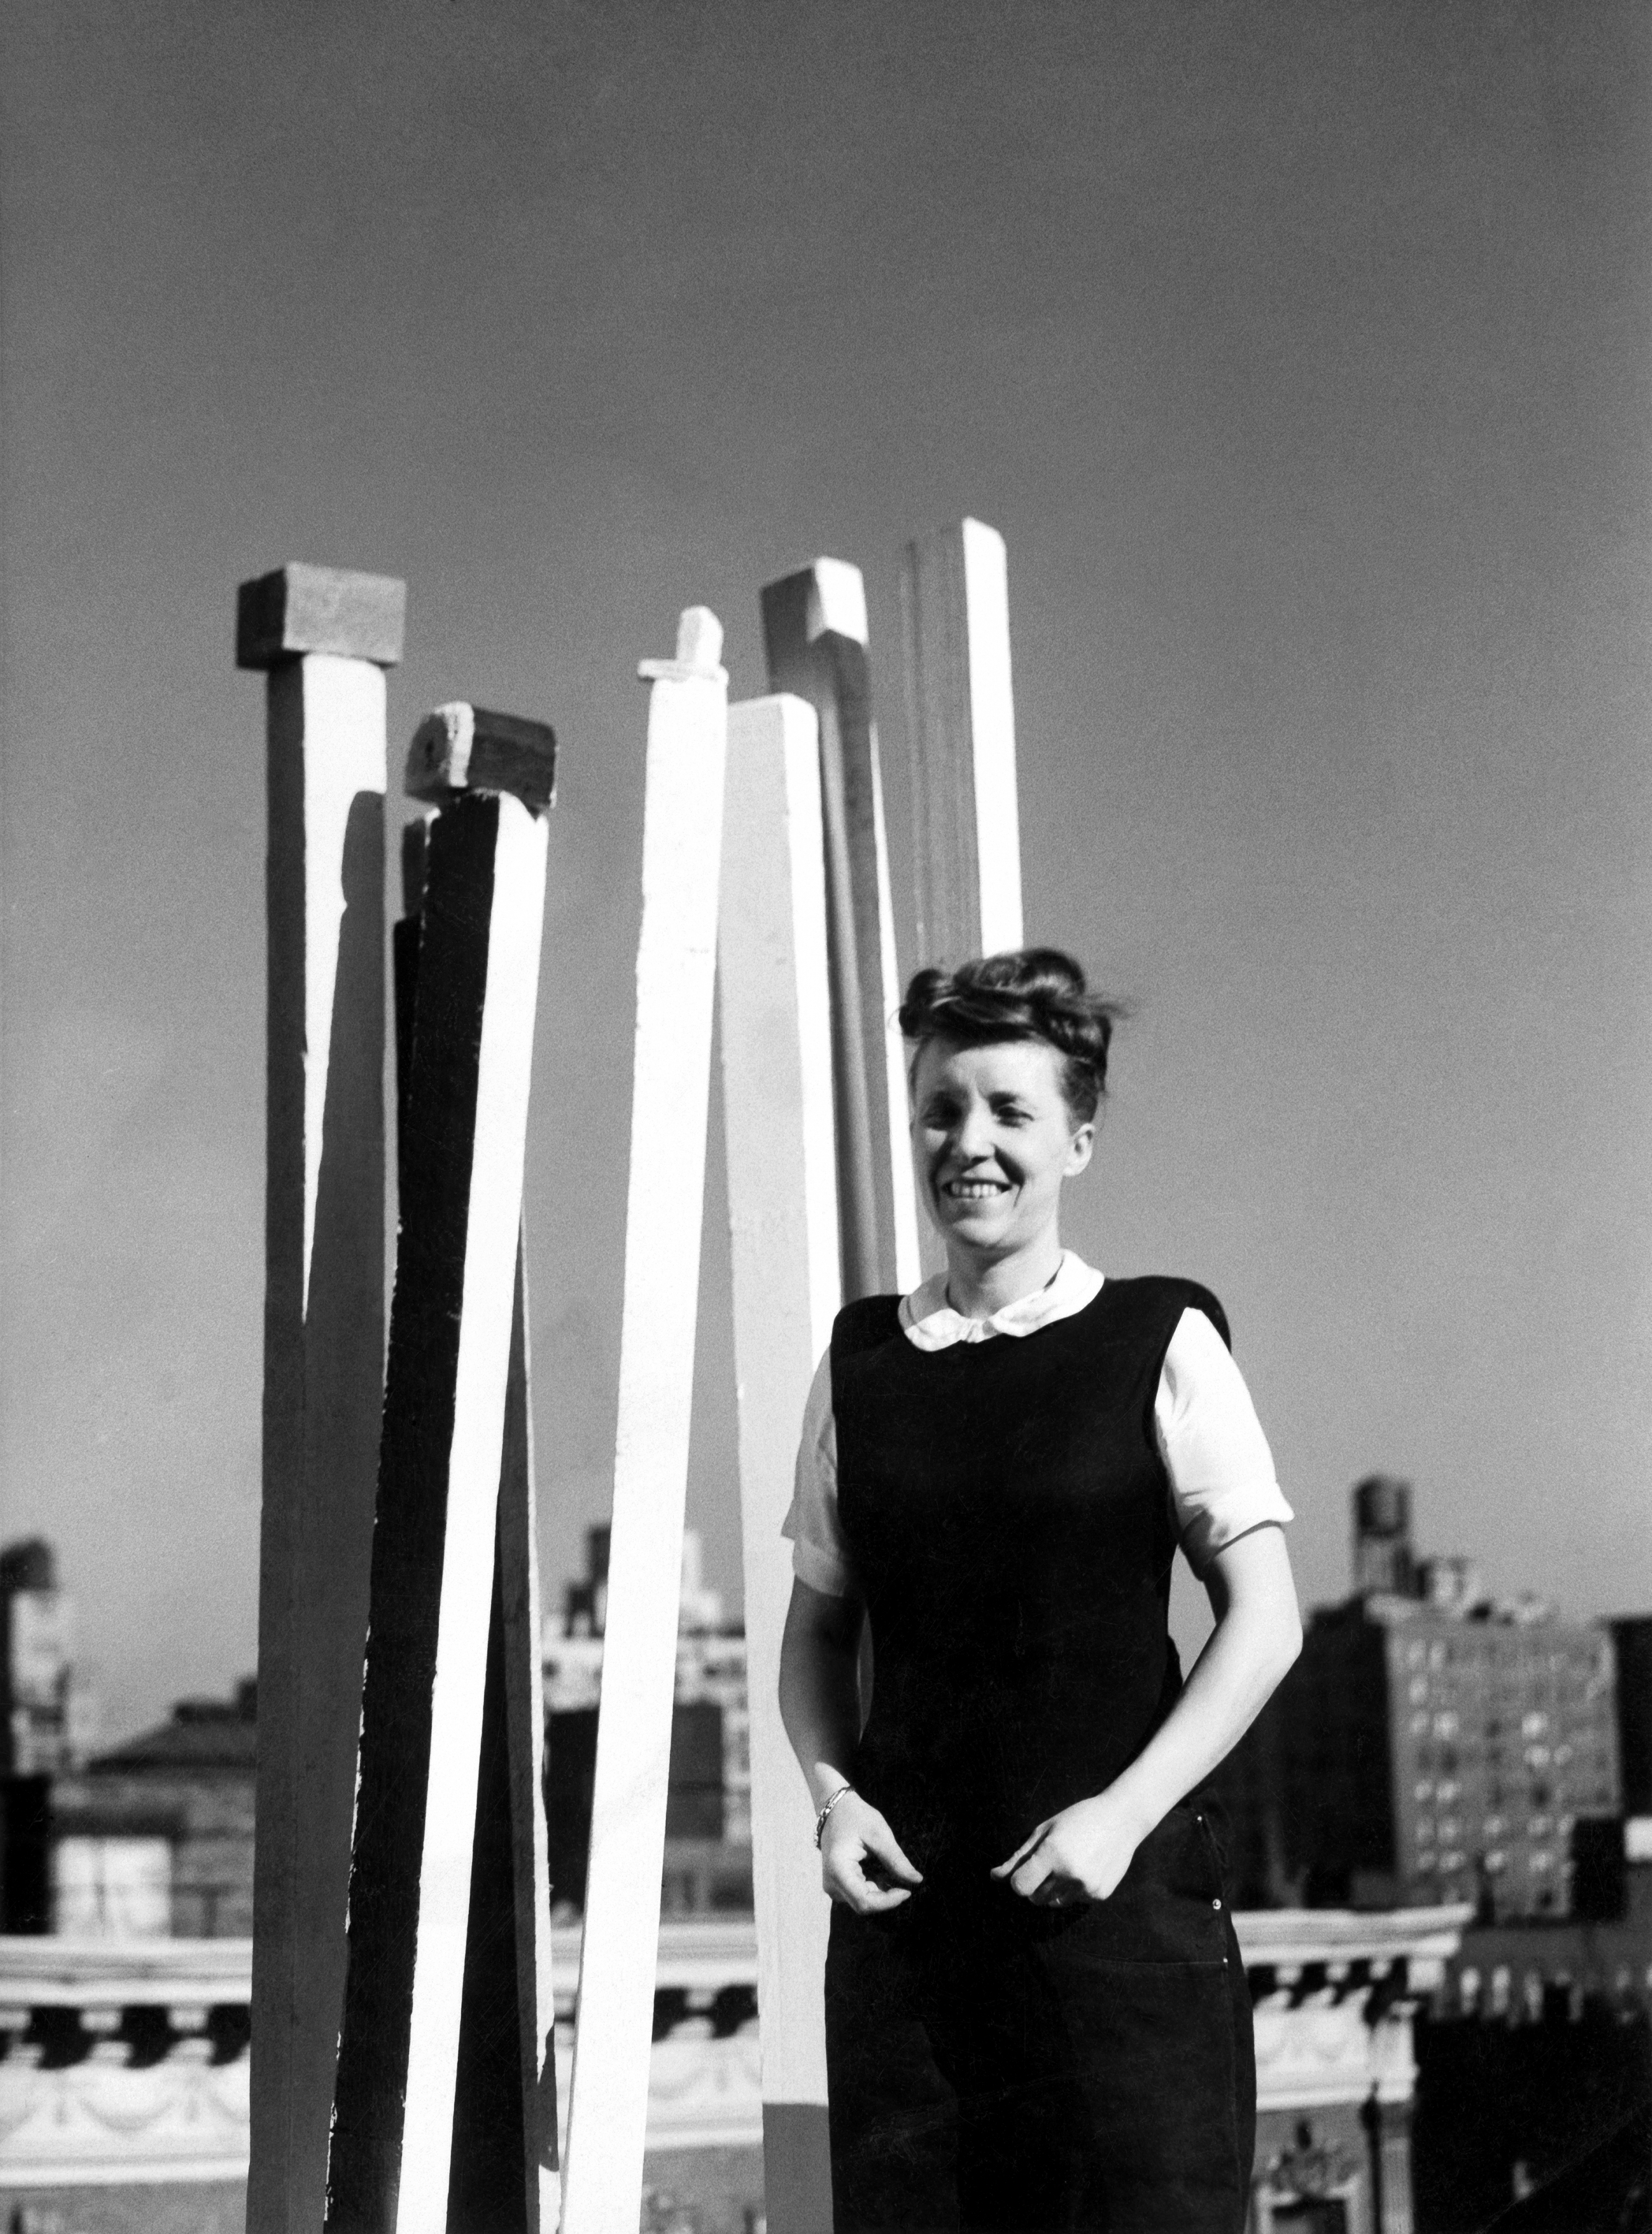 Louise Bourgeois with her sculpture on the roof of her NYC apartment building, circa 1944.

Photo: &copy; The Easton Foundation/Licensed by VAGA at ARS, NY.